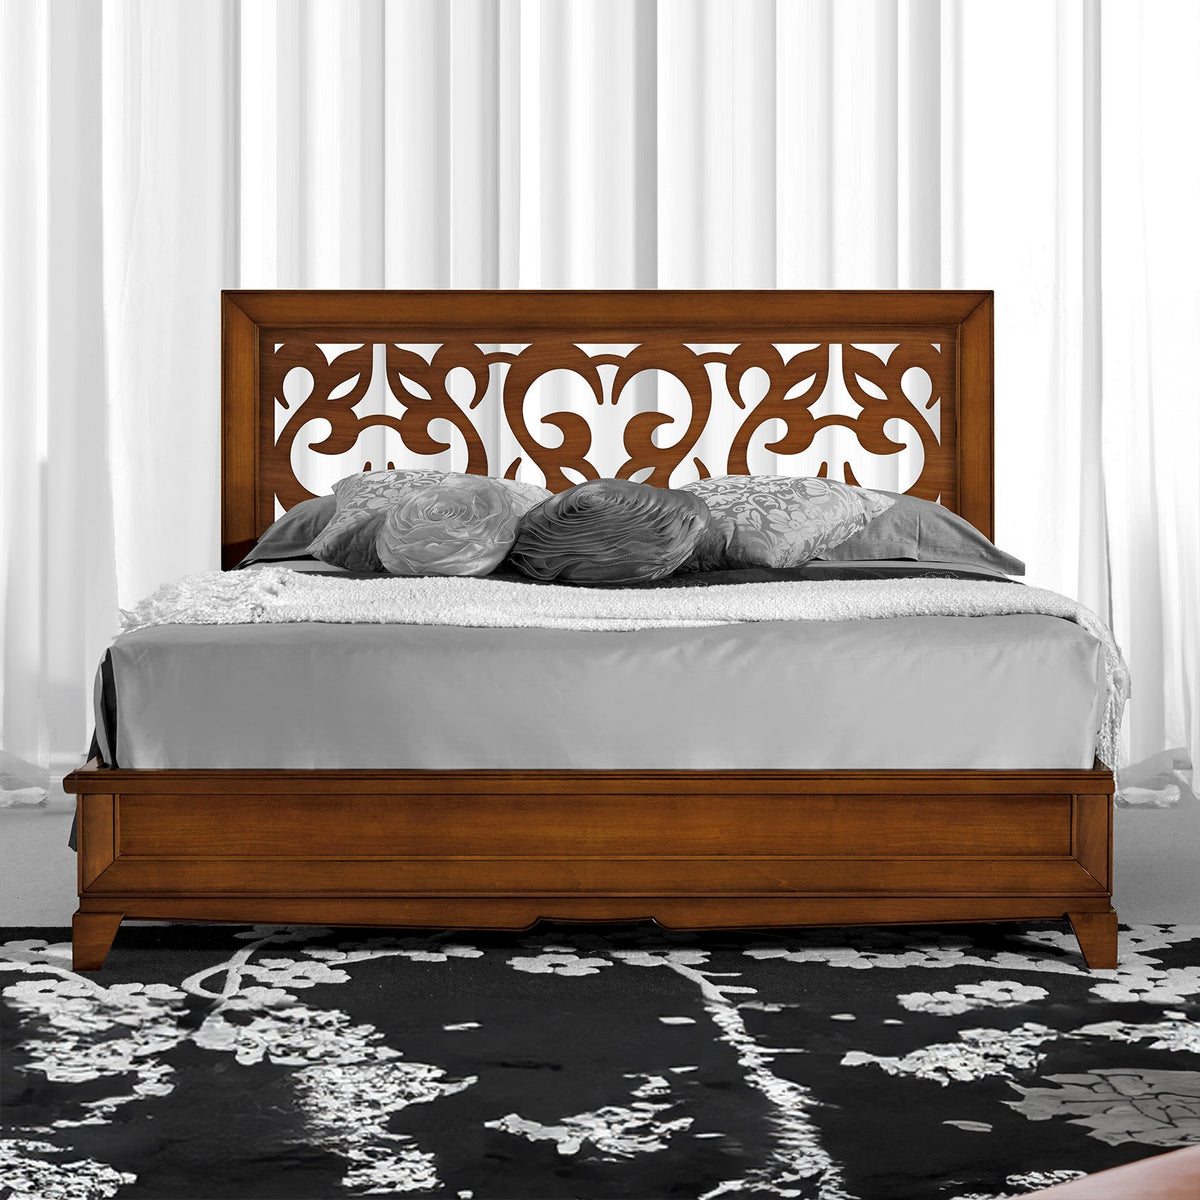 Classic double bed in wood with perforated headboard L 194 D 211 cm Arte D'Este Piombini Collection